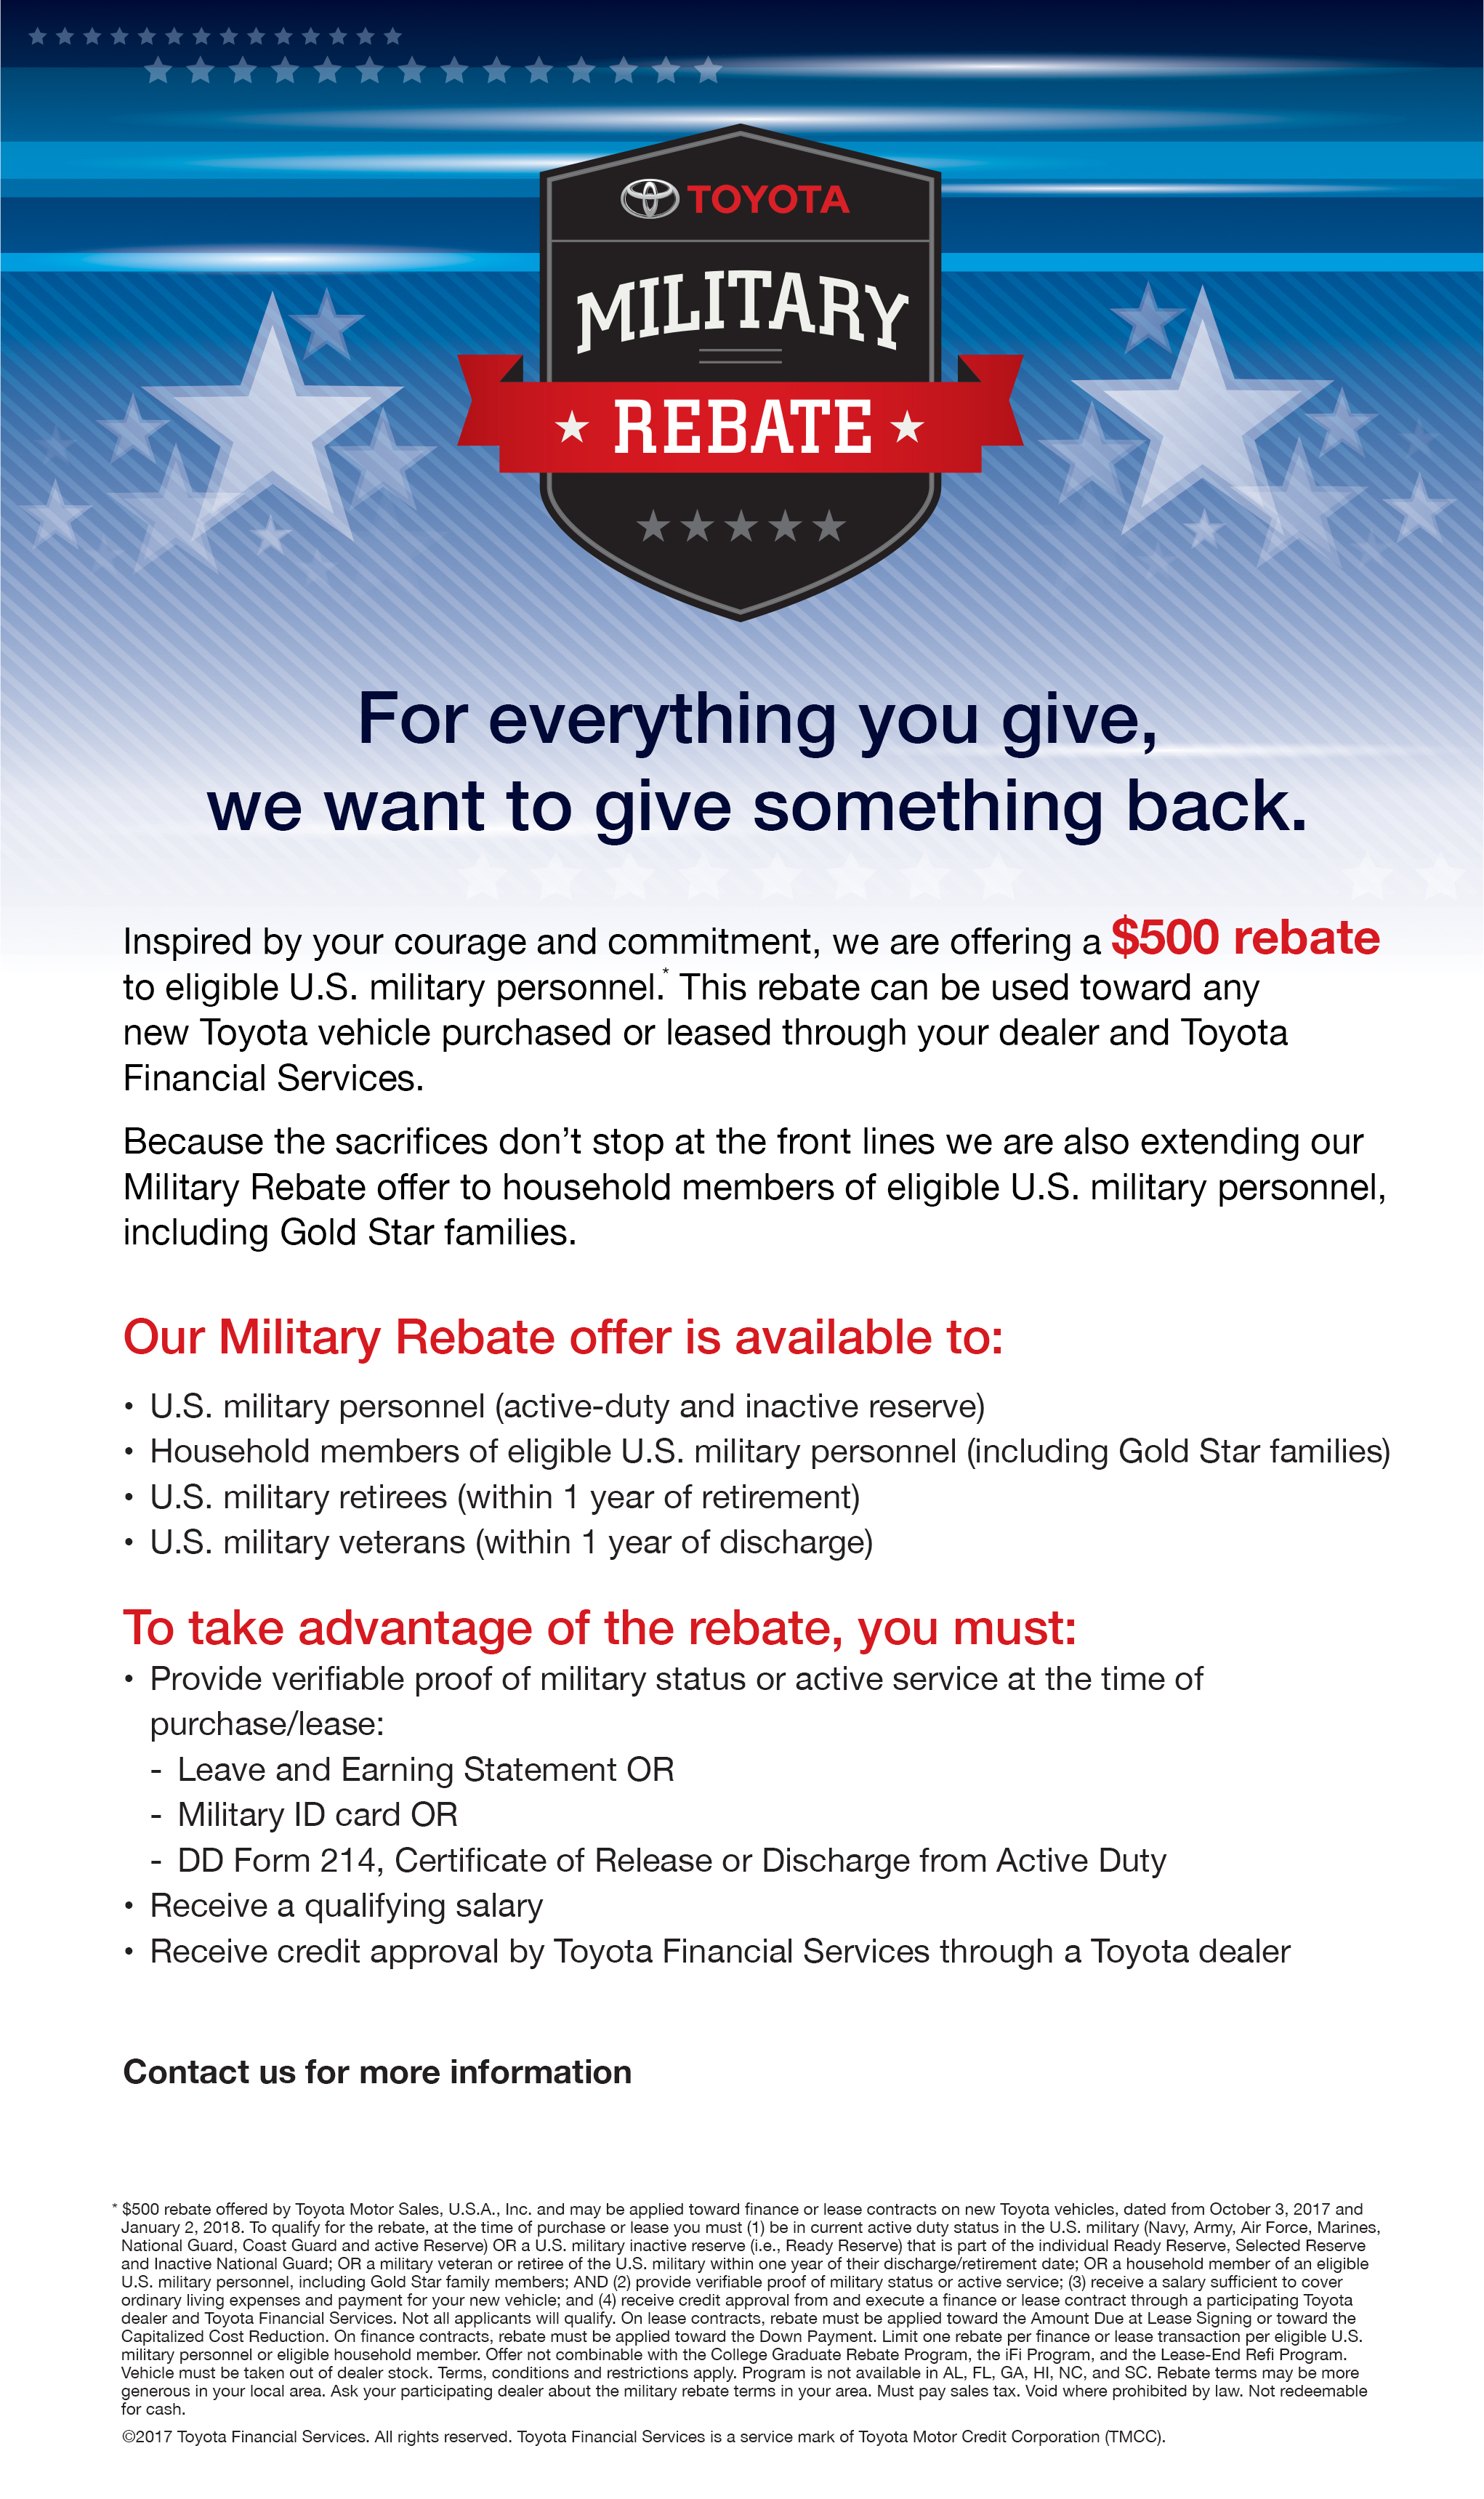 ford-military-rebate-baltimore-md-ellicott-city-specials